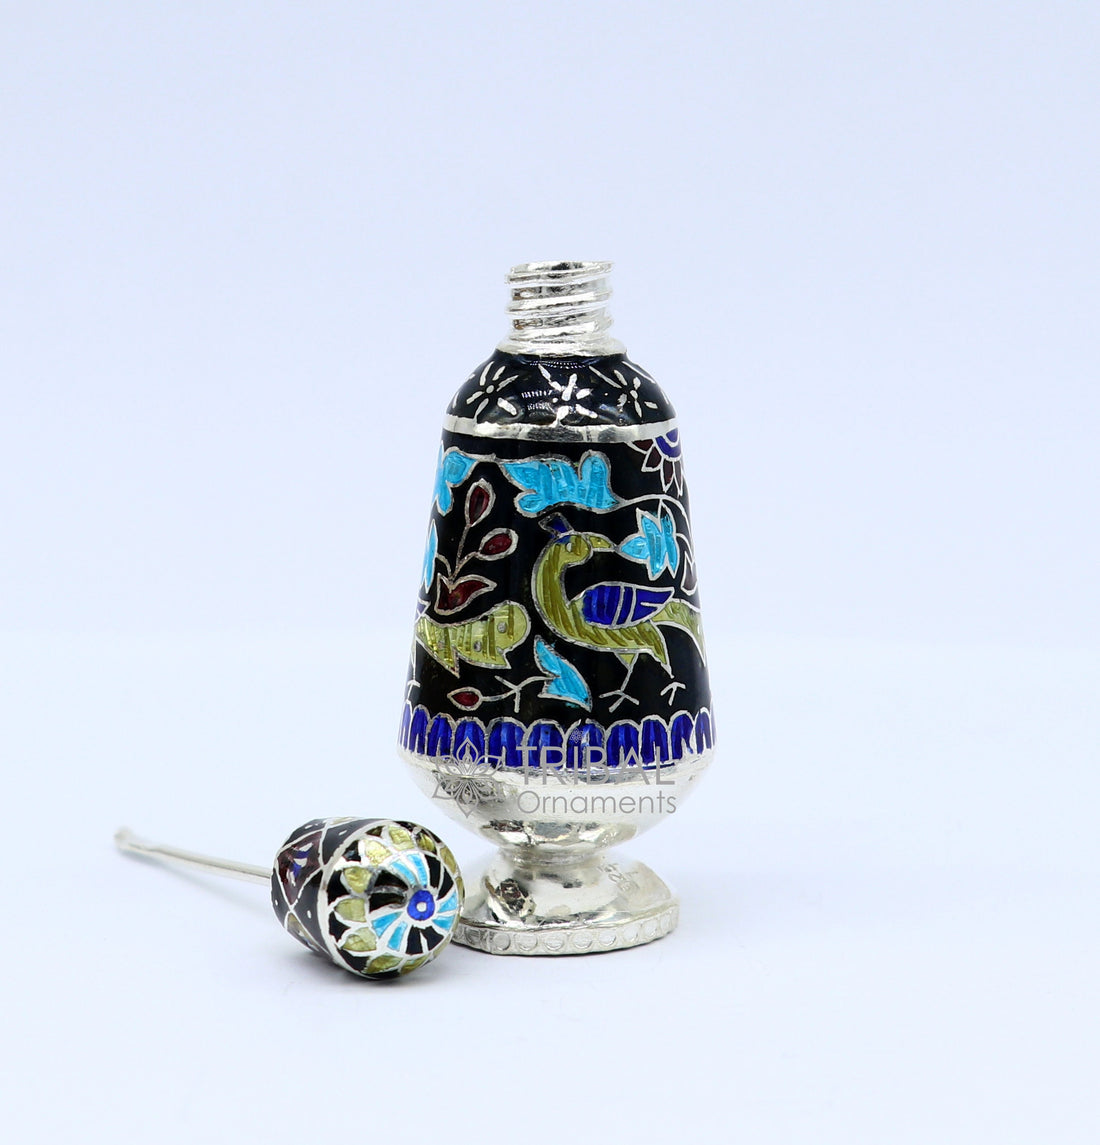 925 Sterling silver handmade fabulous trinket box, gorgeous container box, casket box, sindoor box, enamel work brides gifting box stb789 - TRIBAL ORNAMENTS